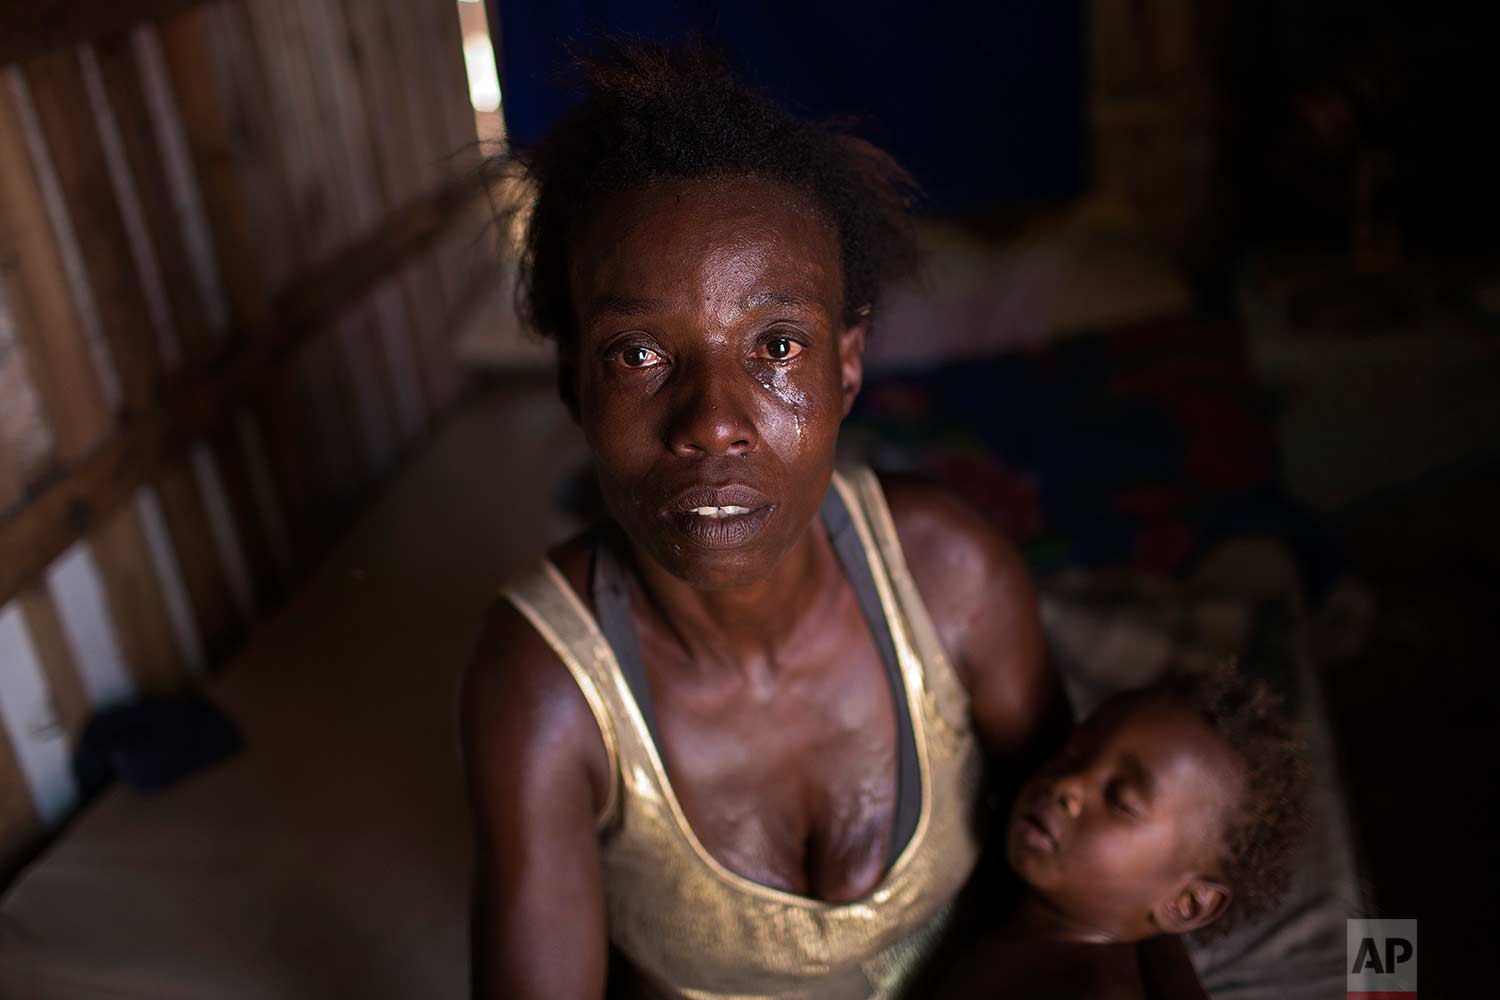  In this Oct. 20, 2017 photo, Simone Batista, holding her baby Arthur, looks into the camera as tears roll down her cheeks while she recounts being cut from the "Bolsa Familia" government subsidy program for low-income people, at her shack home in the Jardim Gramacho slum of Rio de Janeiro, Brazil. (AP Photo/Silvia Izquierdo) 